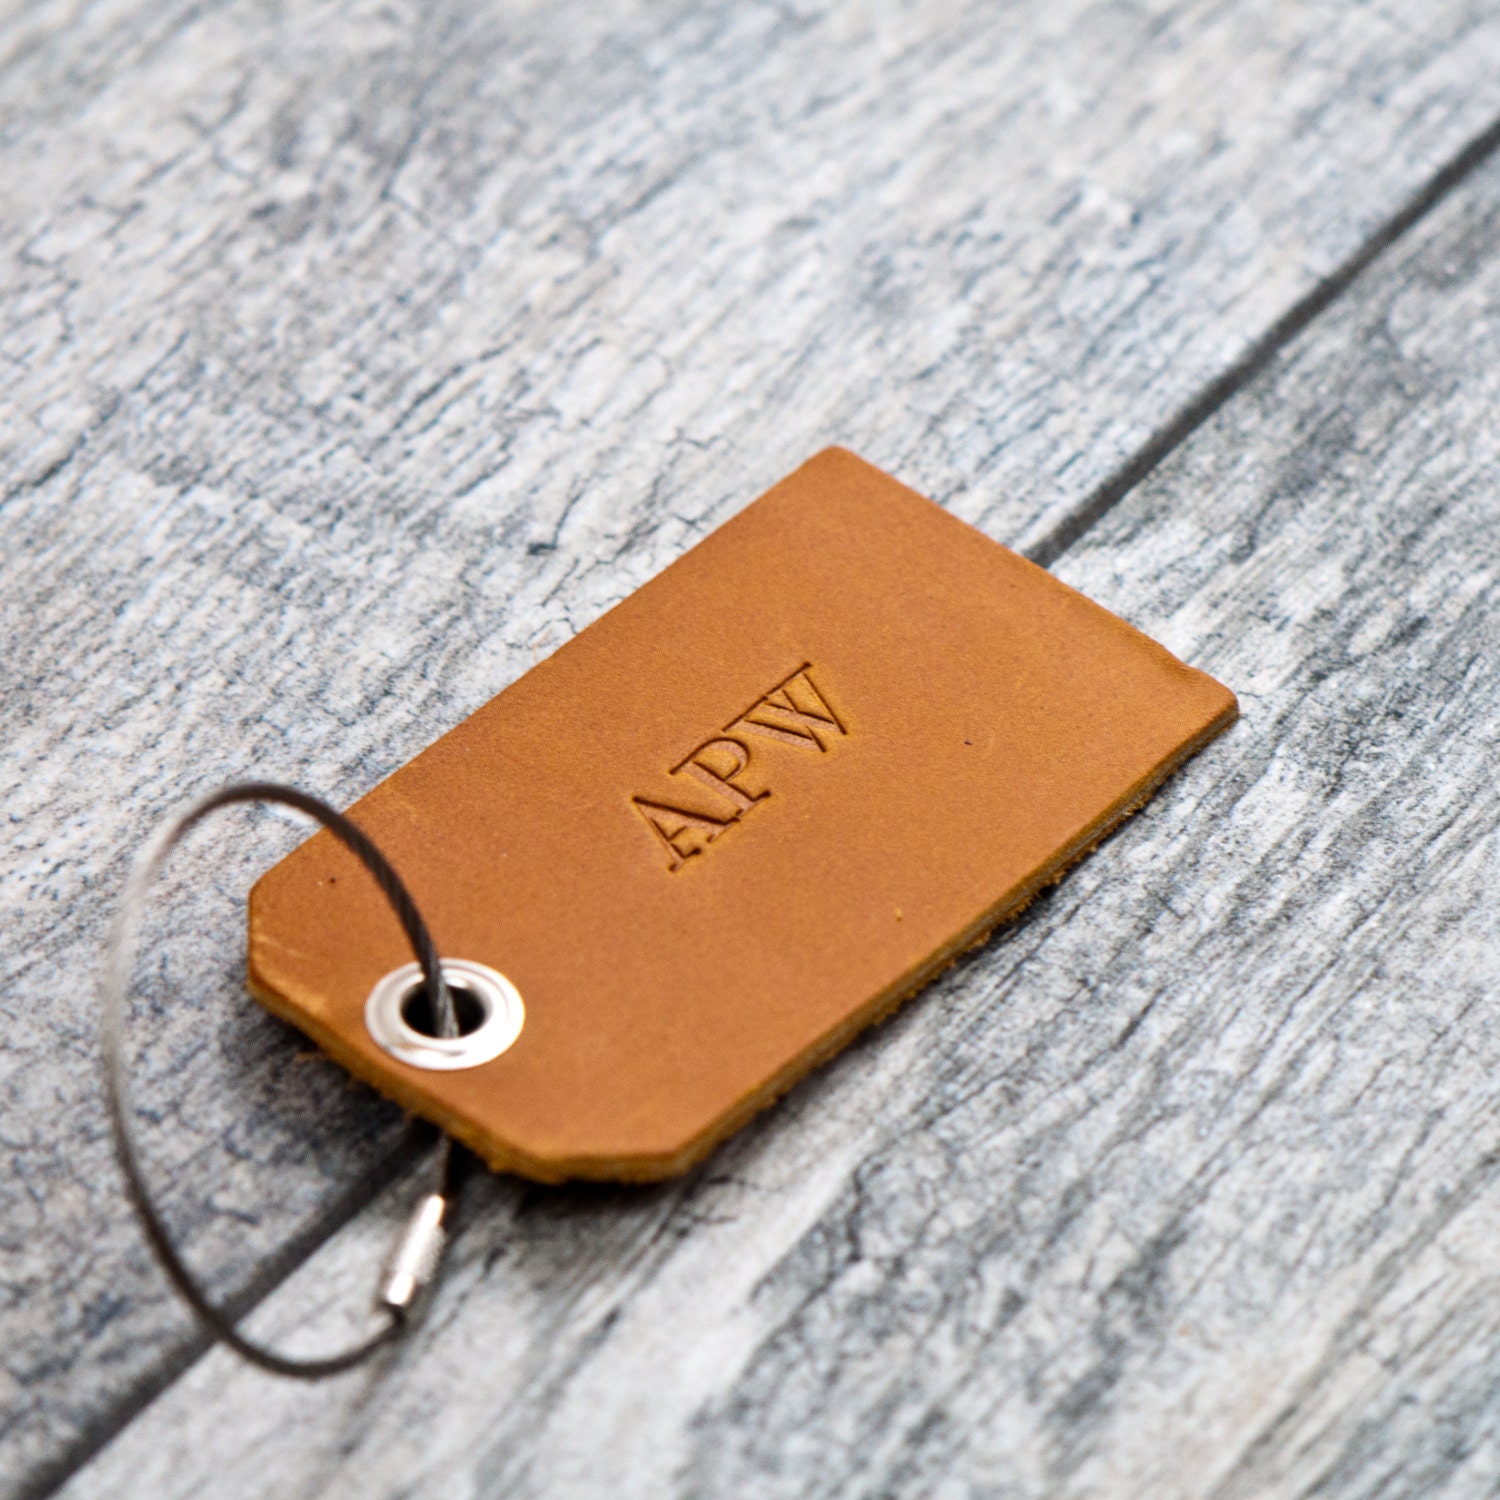 personalized luggage tags with photos